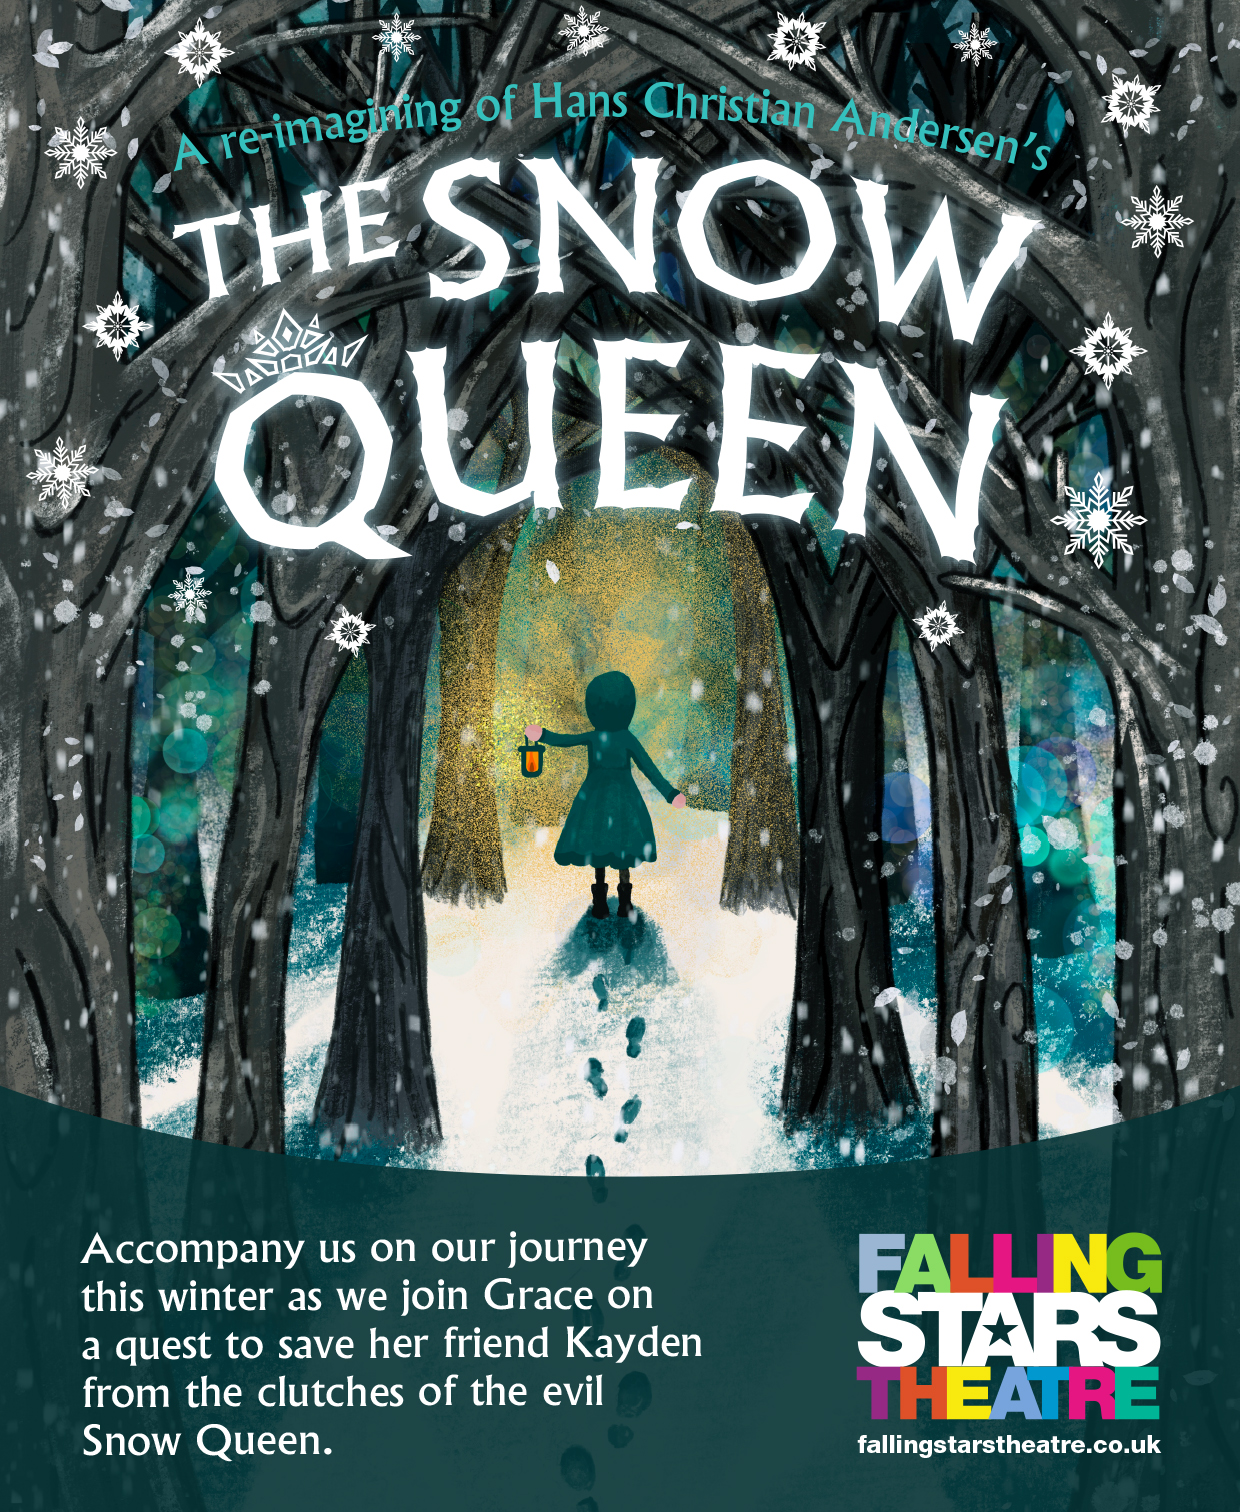 'Snow Queen' Theatre Production by Falling Stars Theatre- Accompany us as we join Grace on a quest to save her friend Kayden from the clutches of the evil Snow Queen.